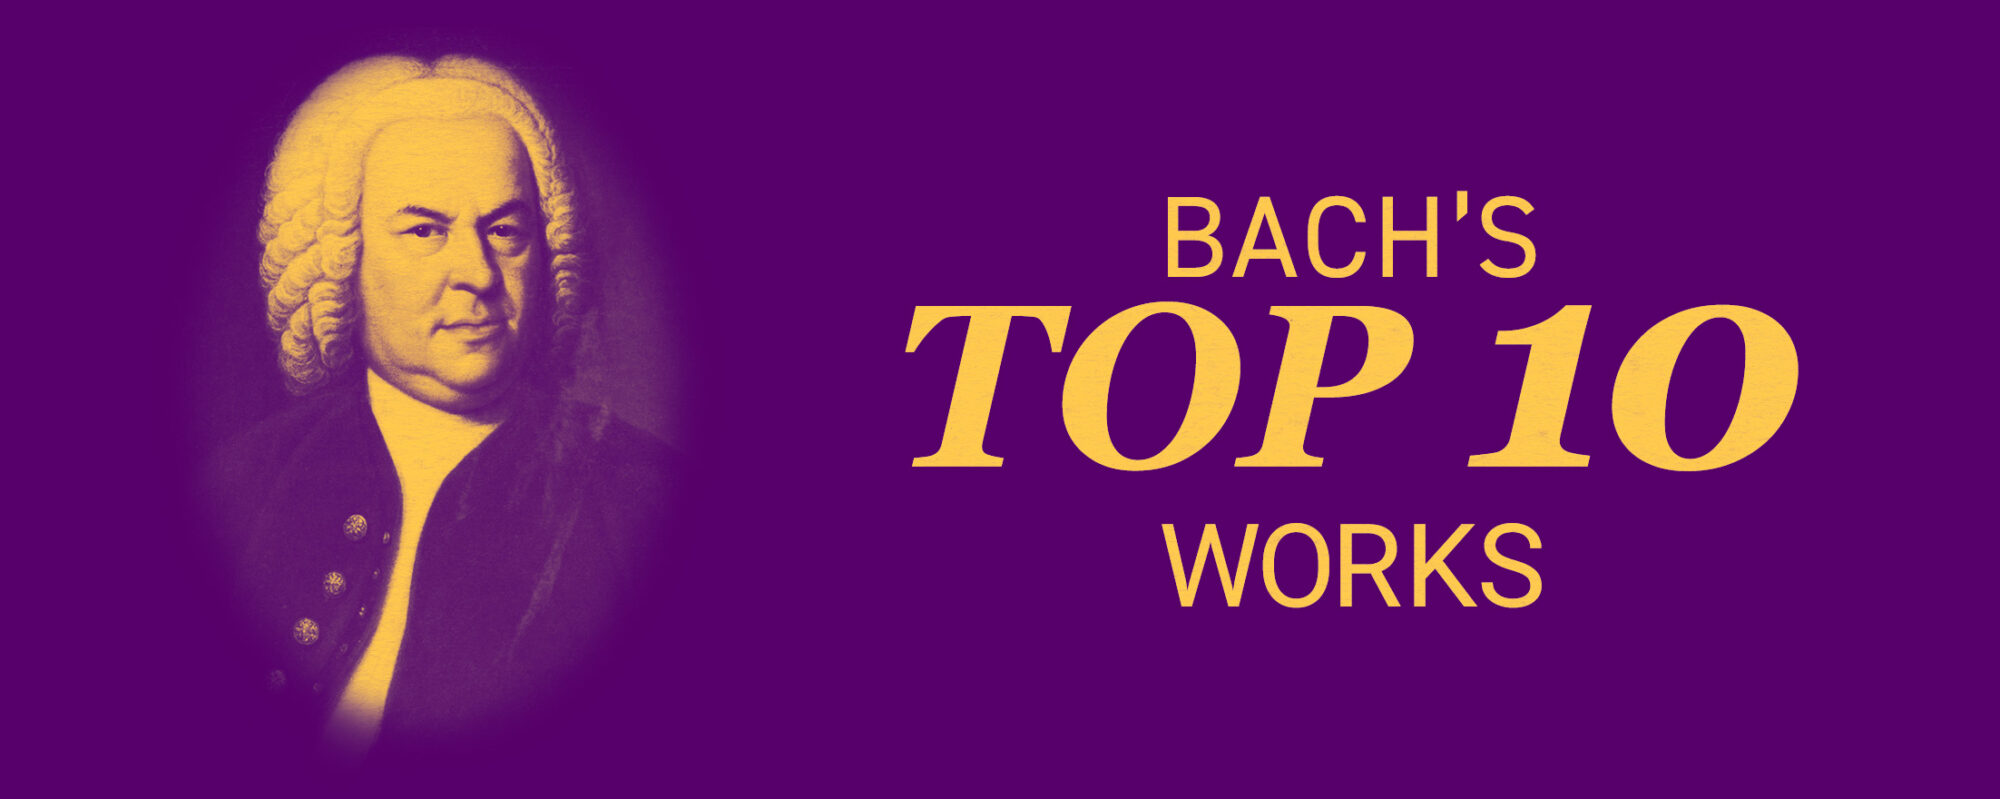 portrait of Bach with text "Bach's Top 10 Works"